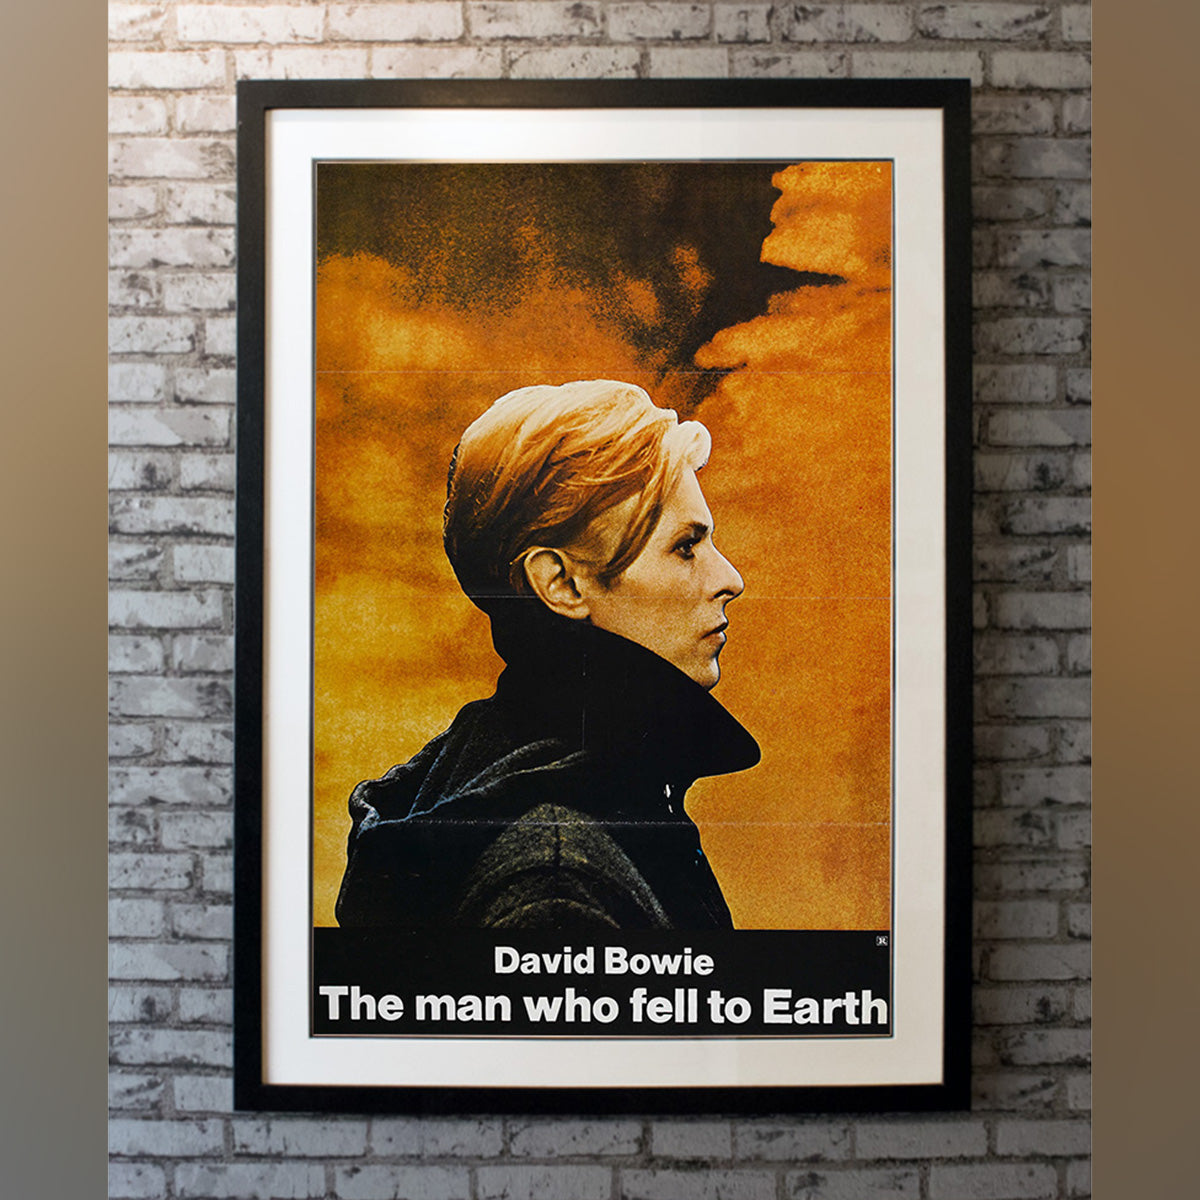 Original Movie Poster of Man Who Fell To Earth, The (1976)